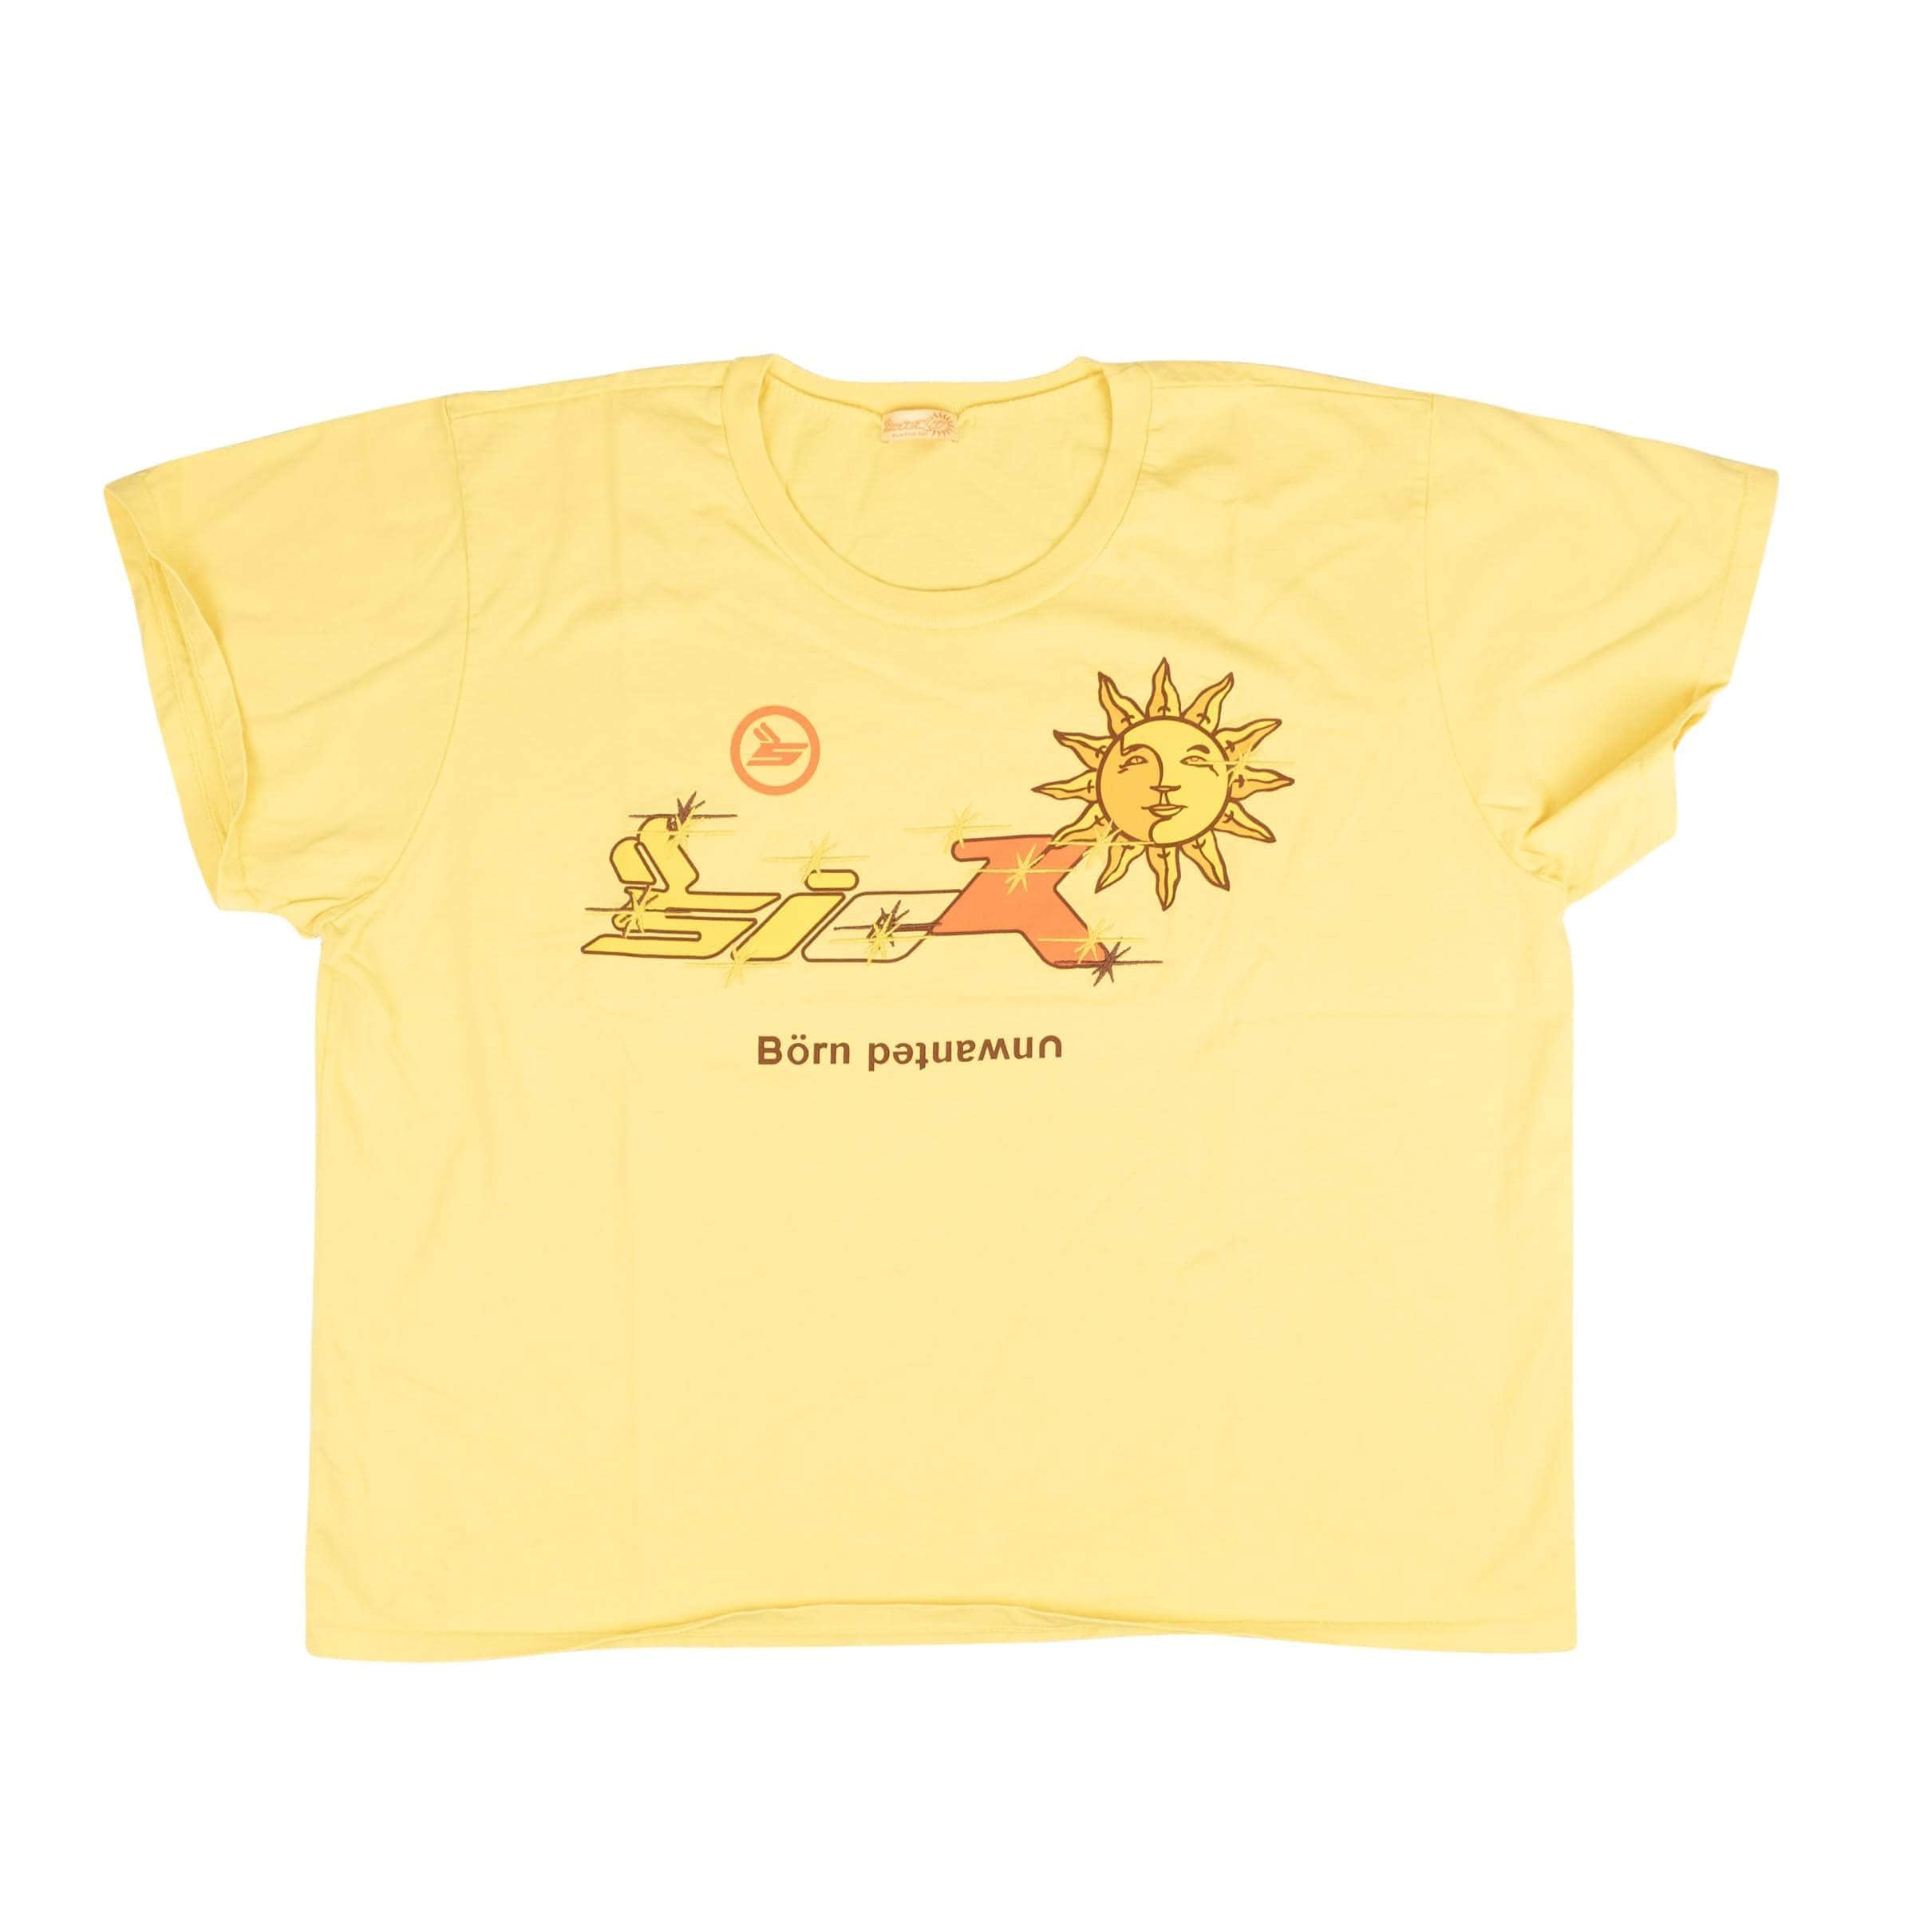 Sicko channelenable-all, chicmi, couponcollection, gender-mens, main-clothing, mens-shoes, sicko, size-l, size-m, size-s, size-xl, size-xxl, under-250 Yellow Short Sleeve Luke.wav Short Sleeve T-Shirt